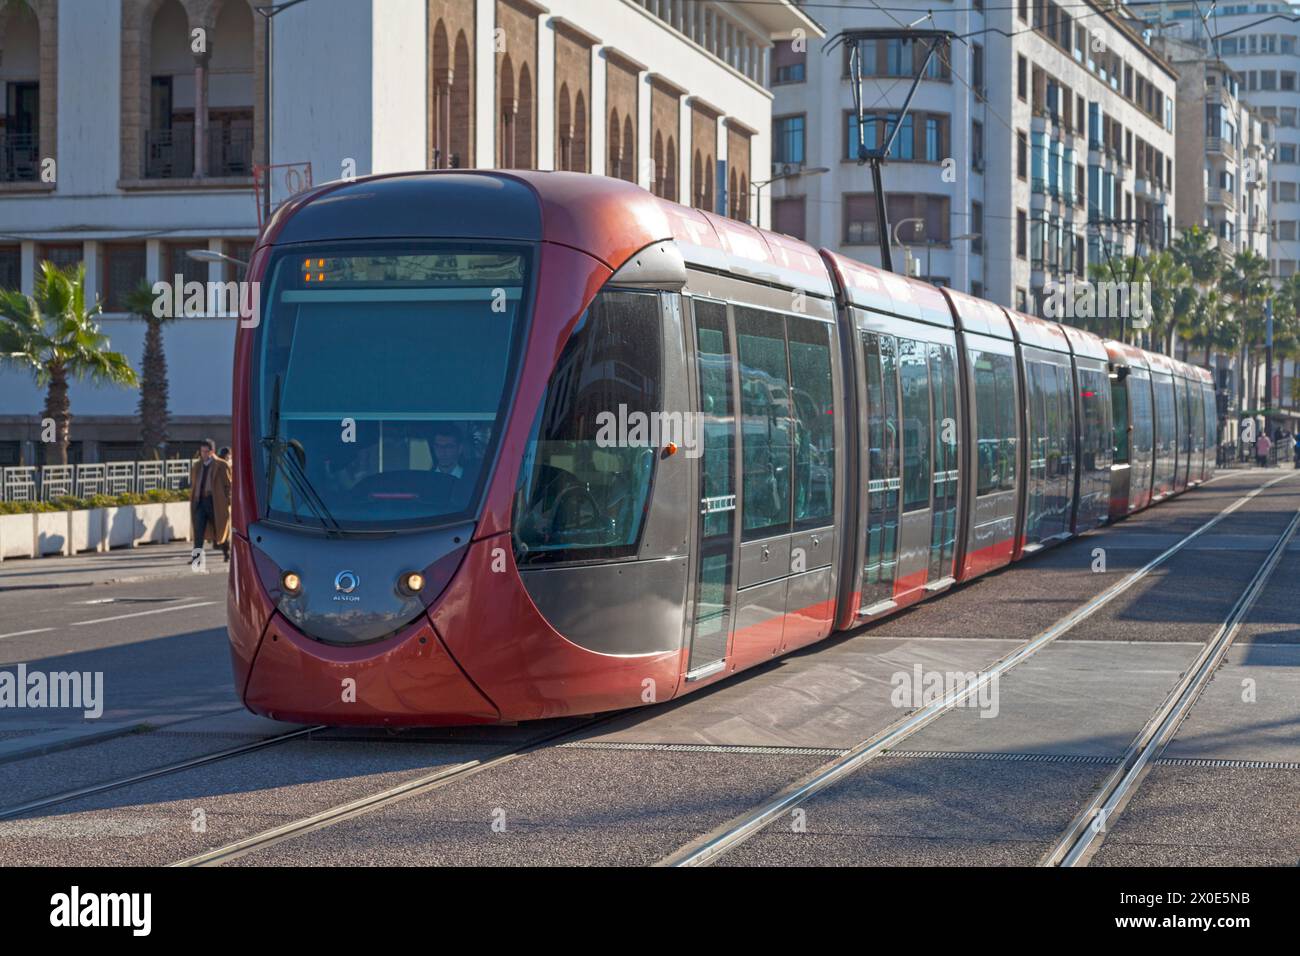 Casablanca, Morocco - January 17 2018: Low-floor tram of the Casablanca Tramway in the city center. Stock Photo